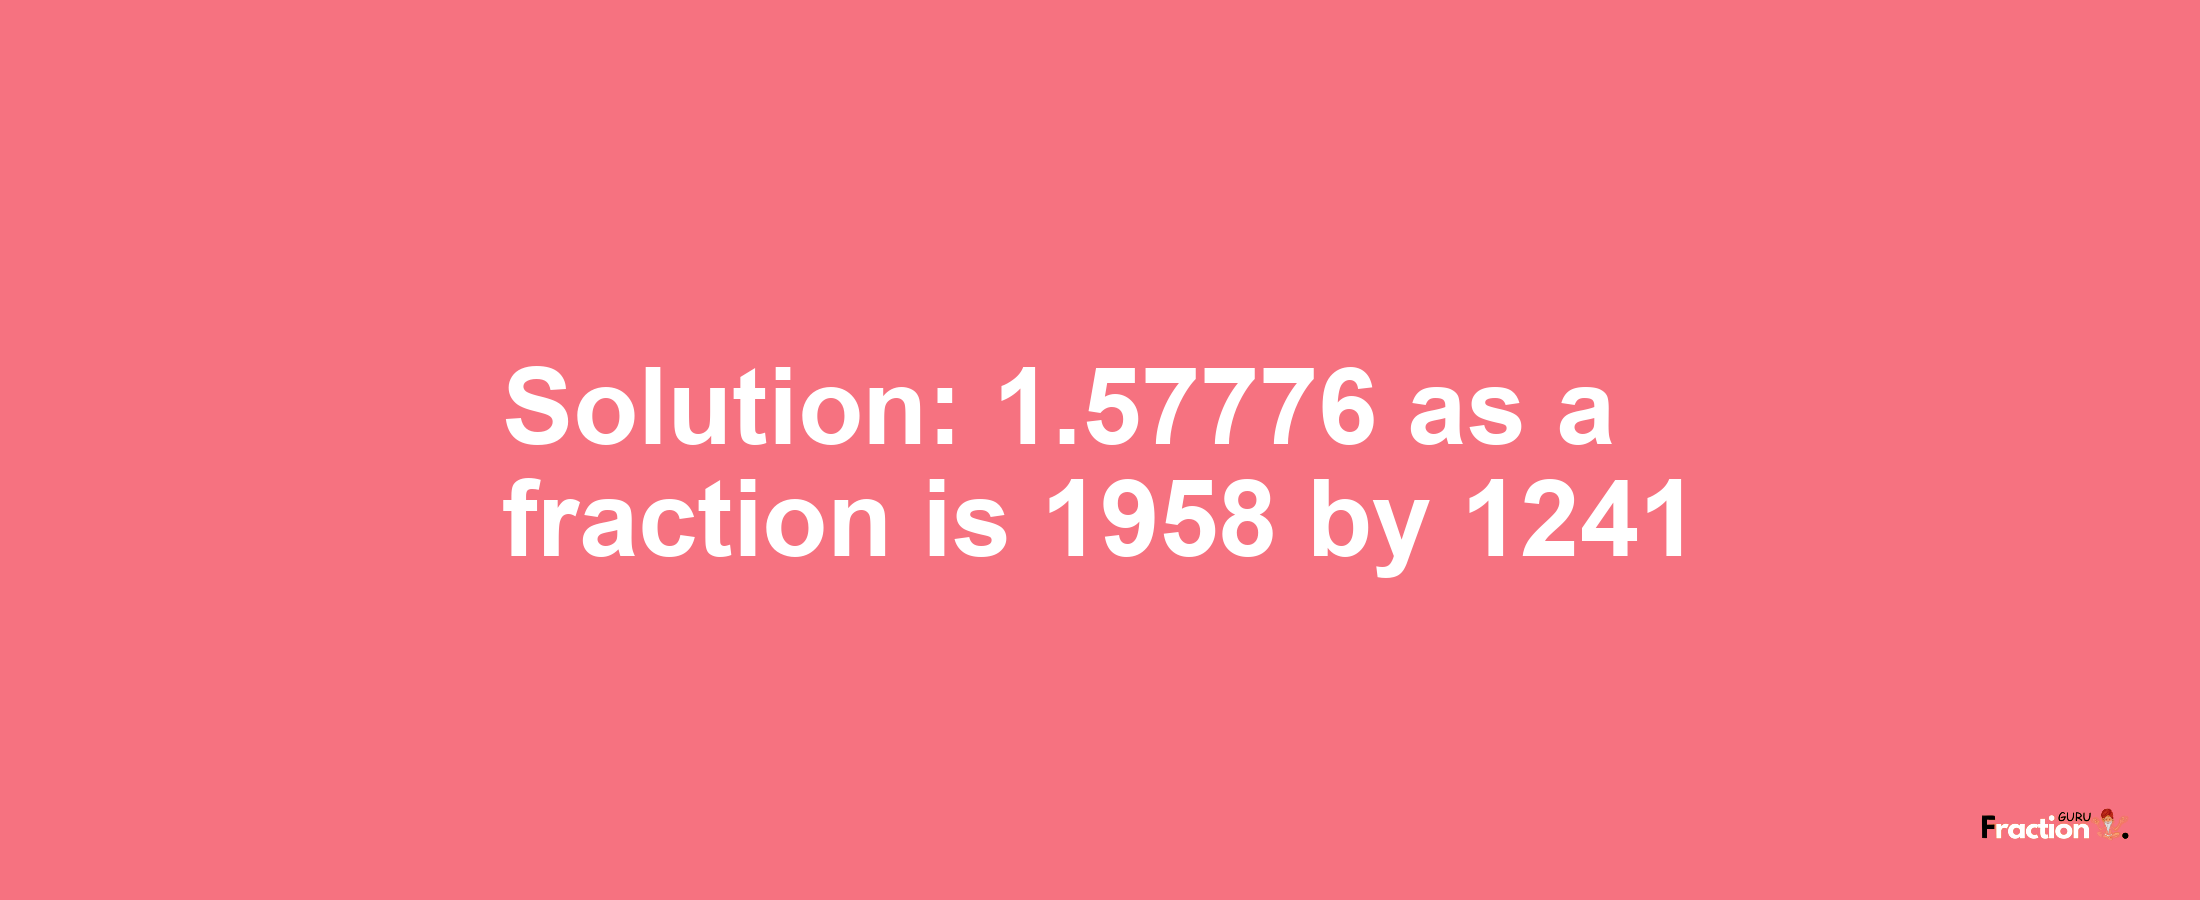 Solution:1.57776 as a fraction is 1958/1241